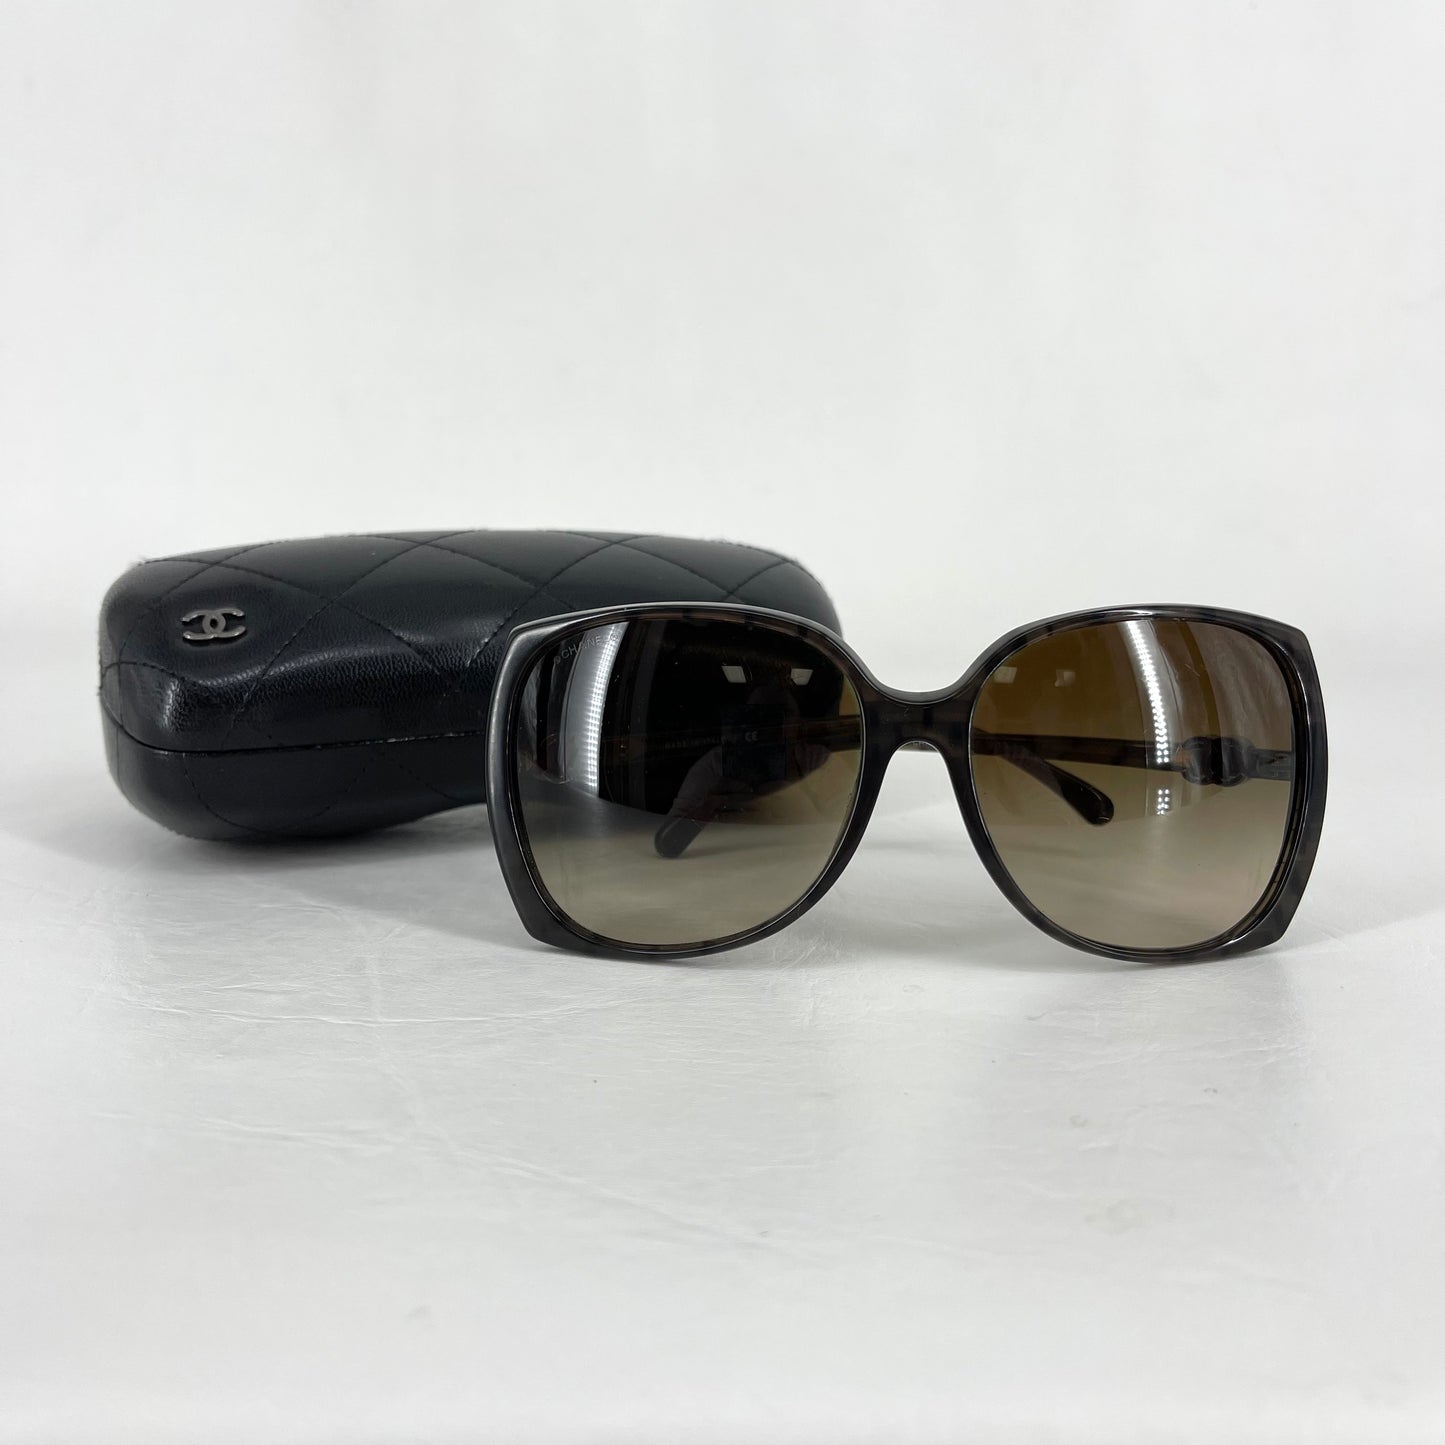 Authentic Chanel Taupe Tortoiseshell Sunglasses with Case 5216